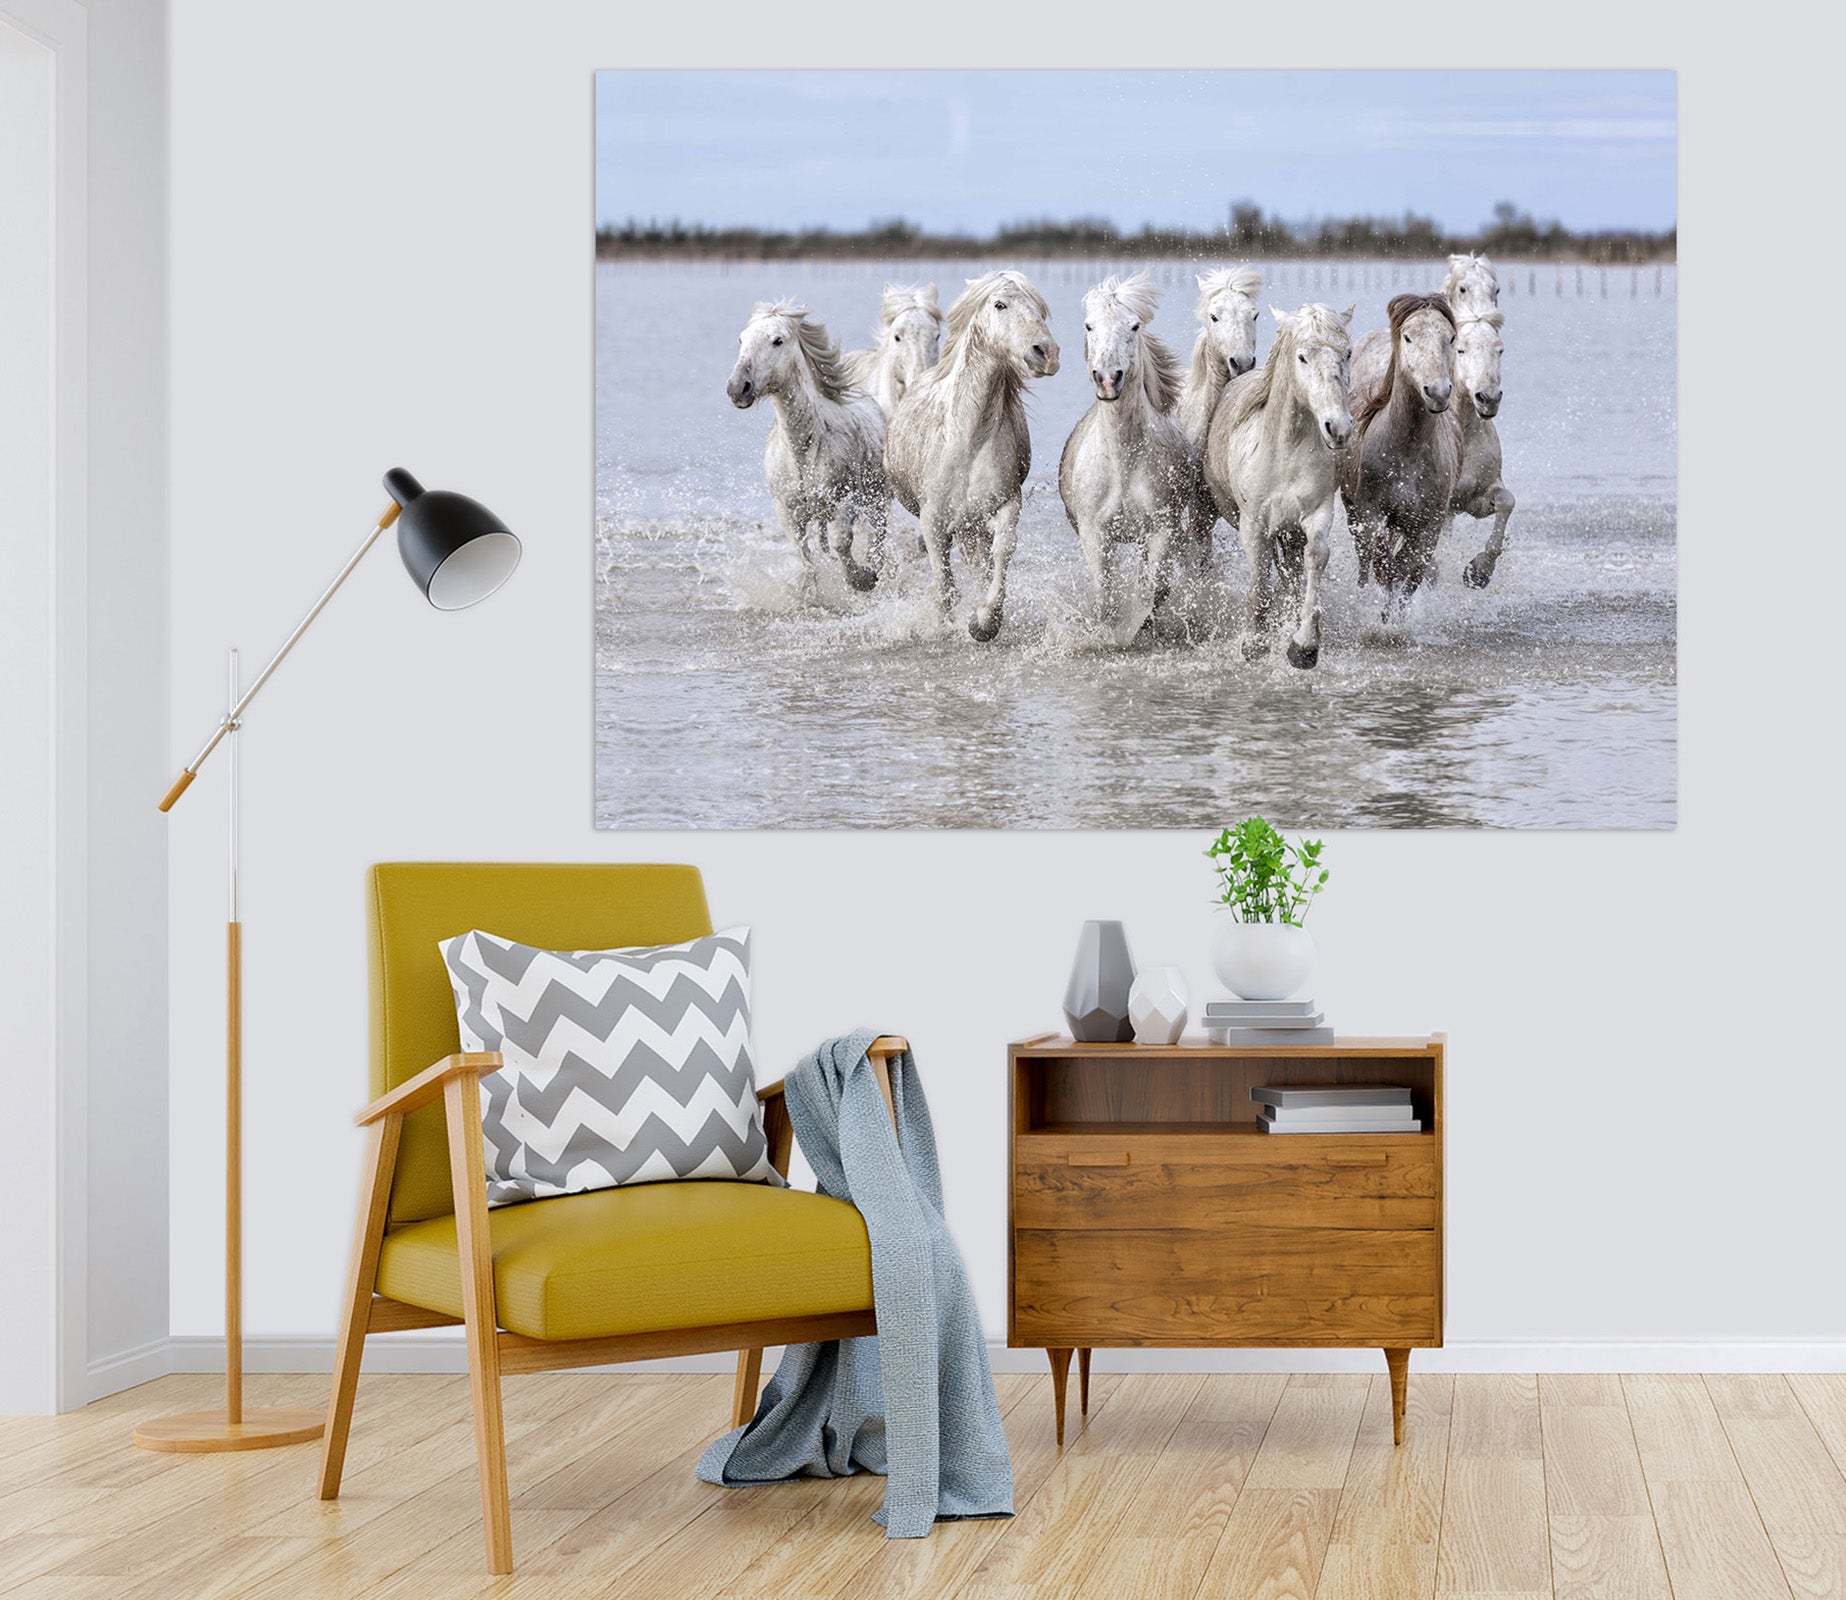 3D White Horse 128 Marco Carmassi Wall Sticker